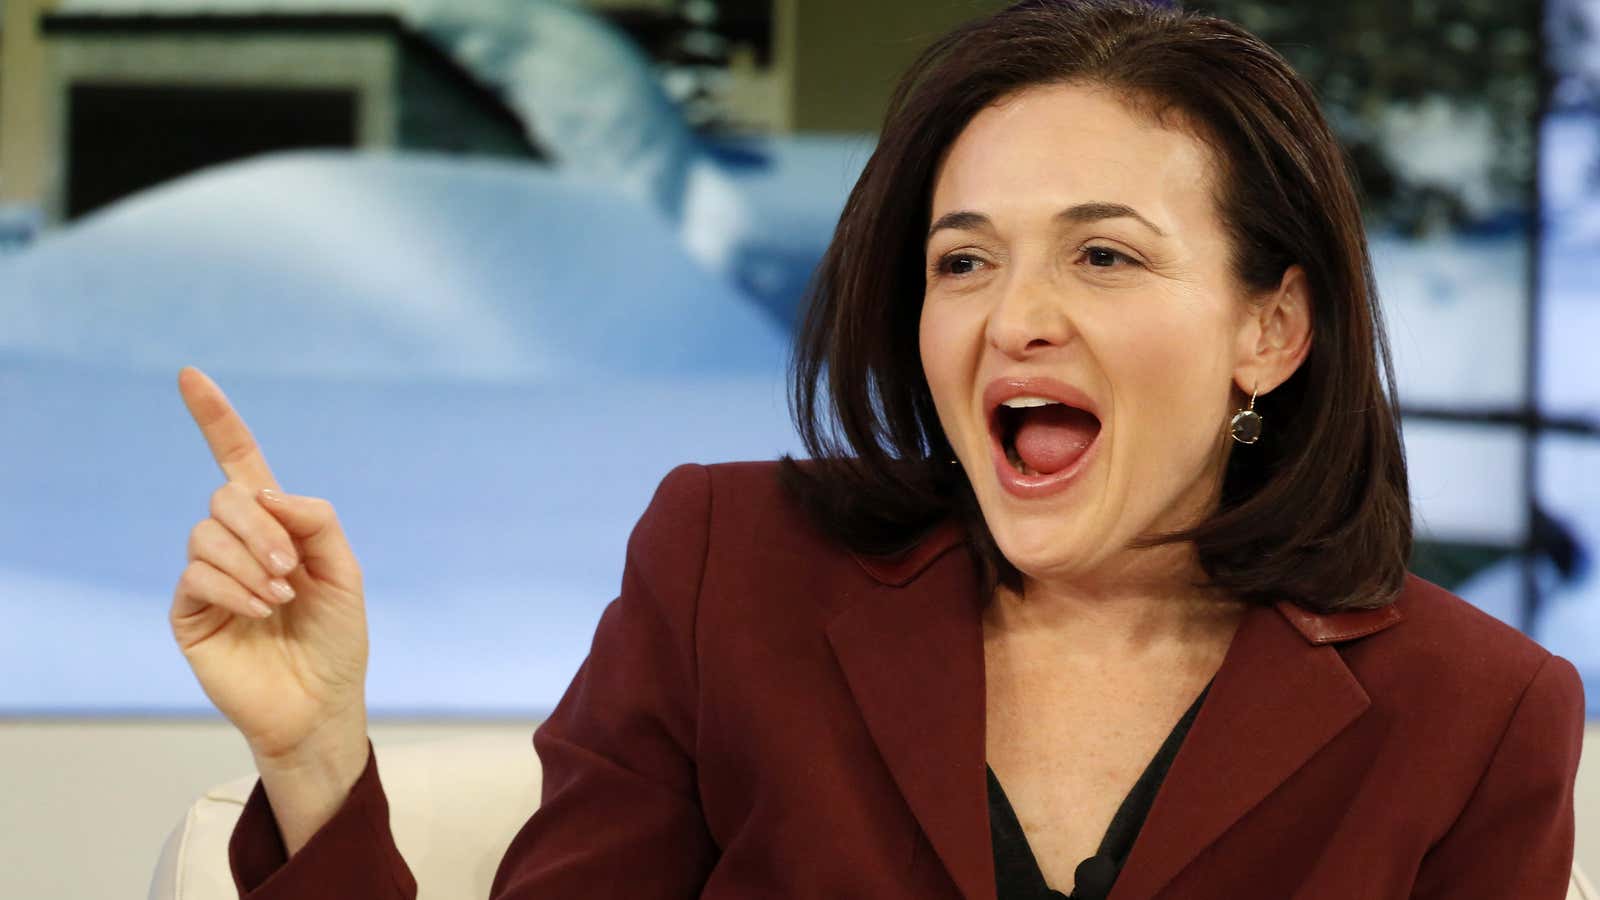 Sandberg’s pay cut is only a temporary blip on the way up.